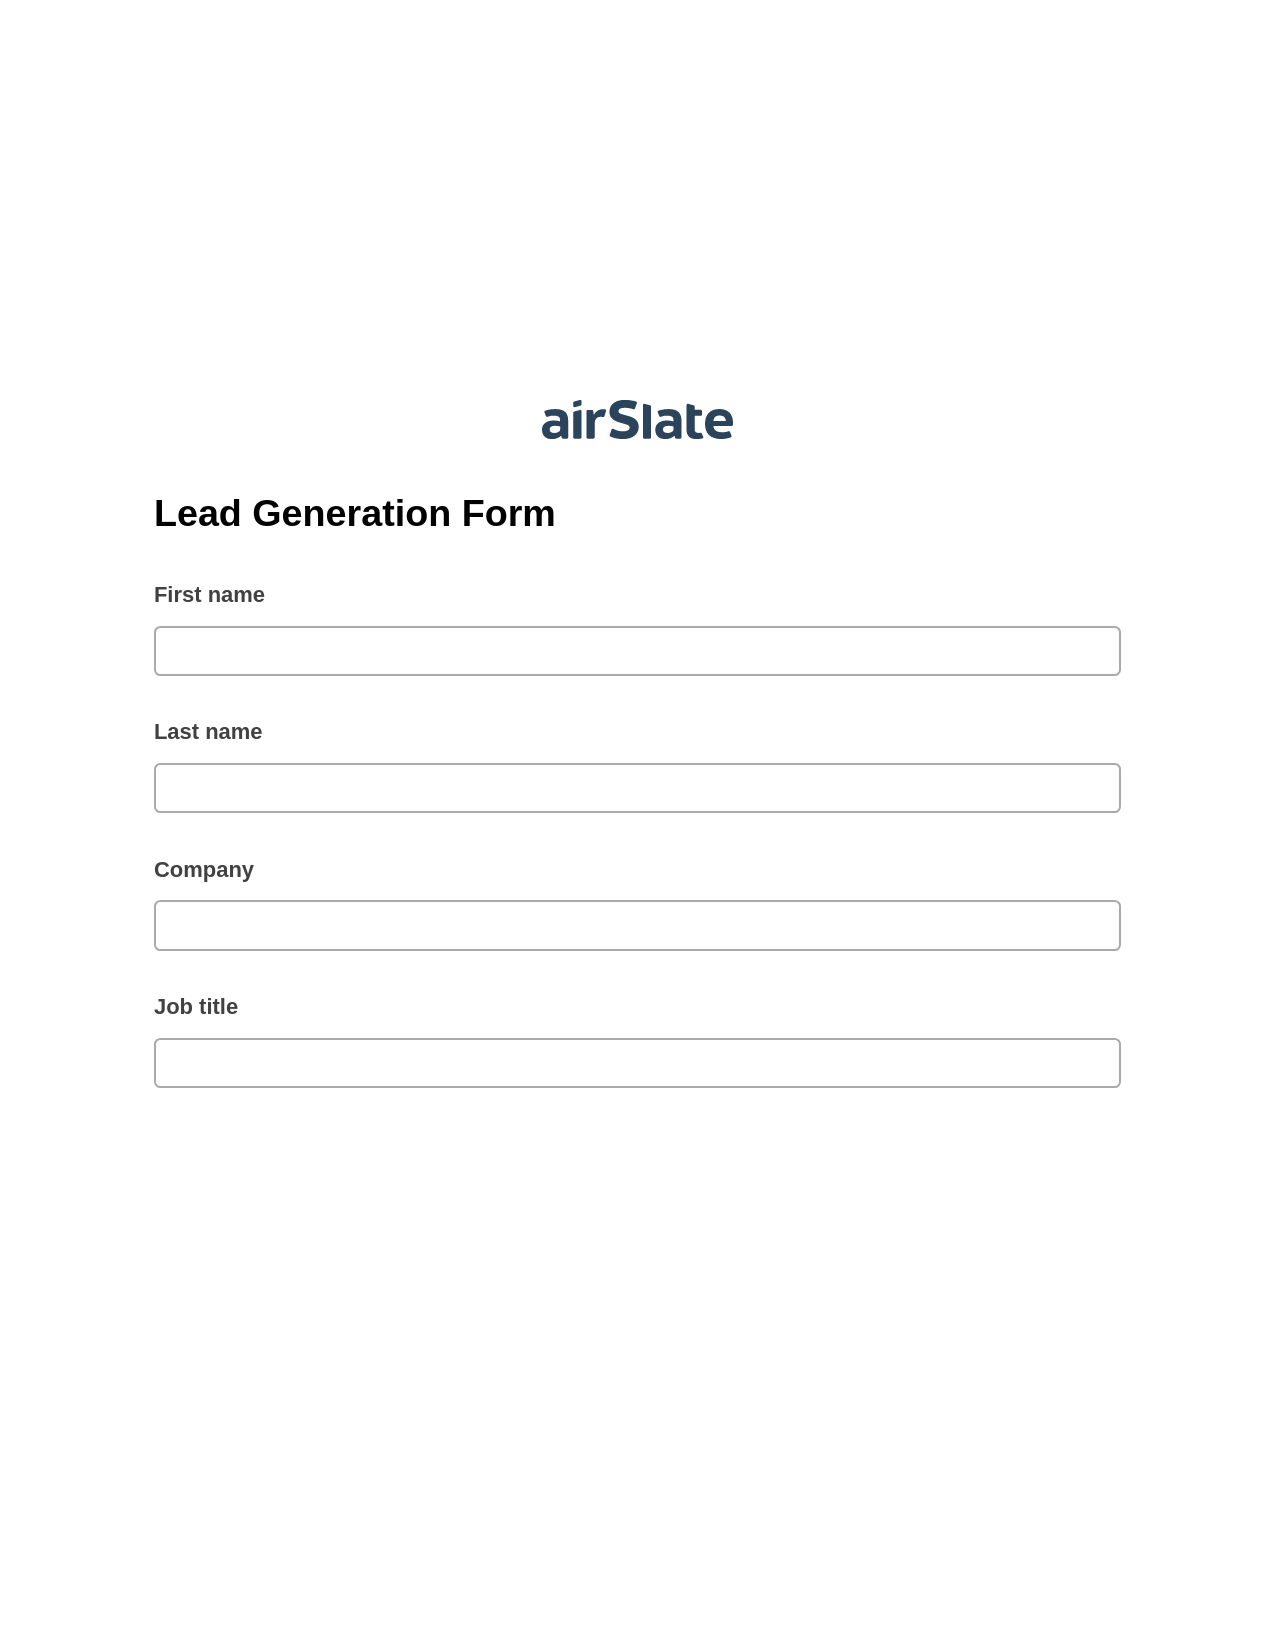 Multirole Lead Generation Form Pre-fill from Google Sheets Bot, Remove Tags From Slate Bot, Export to NetSuite Bot